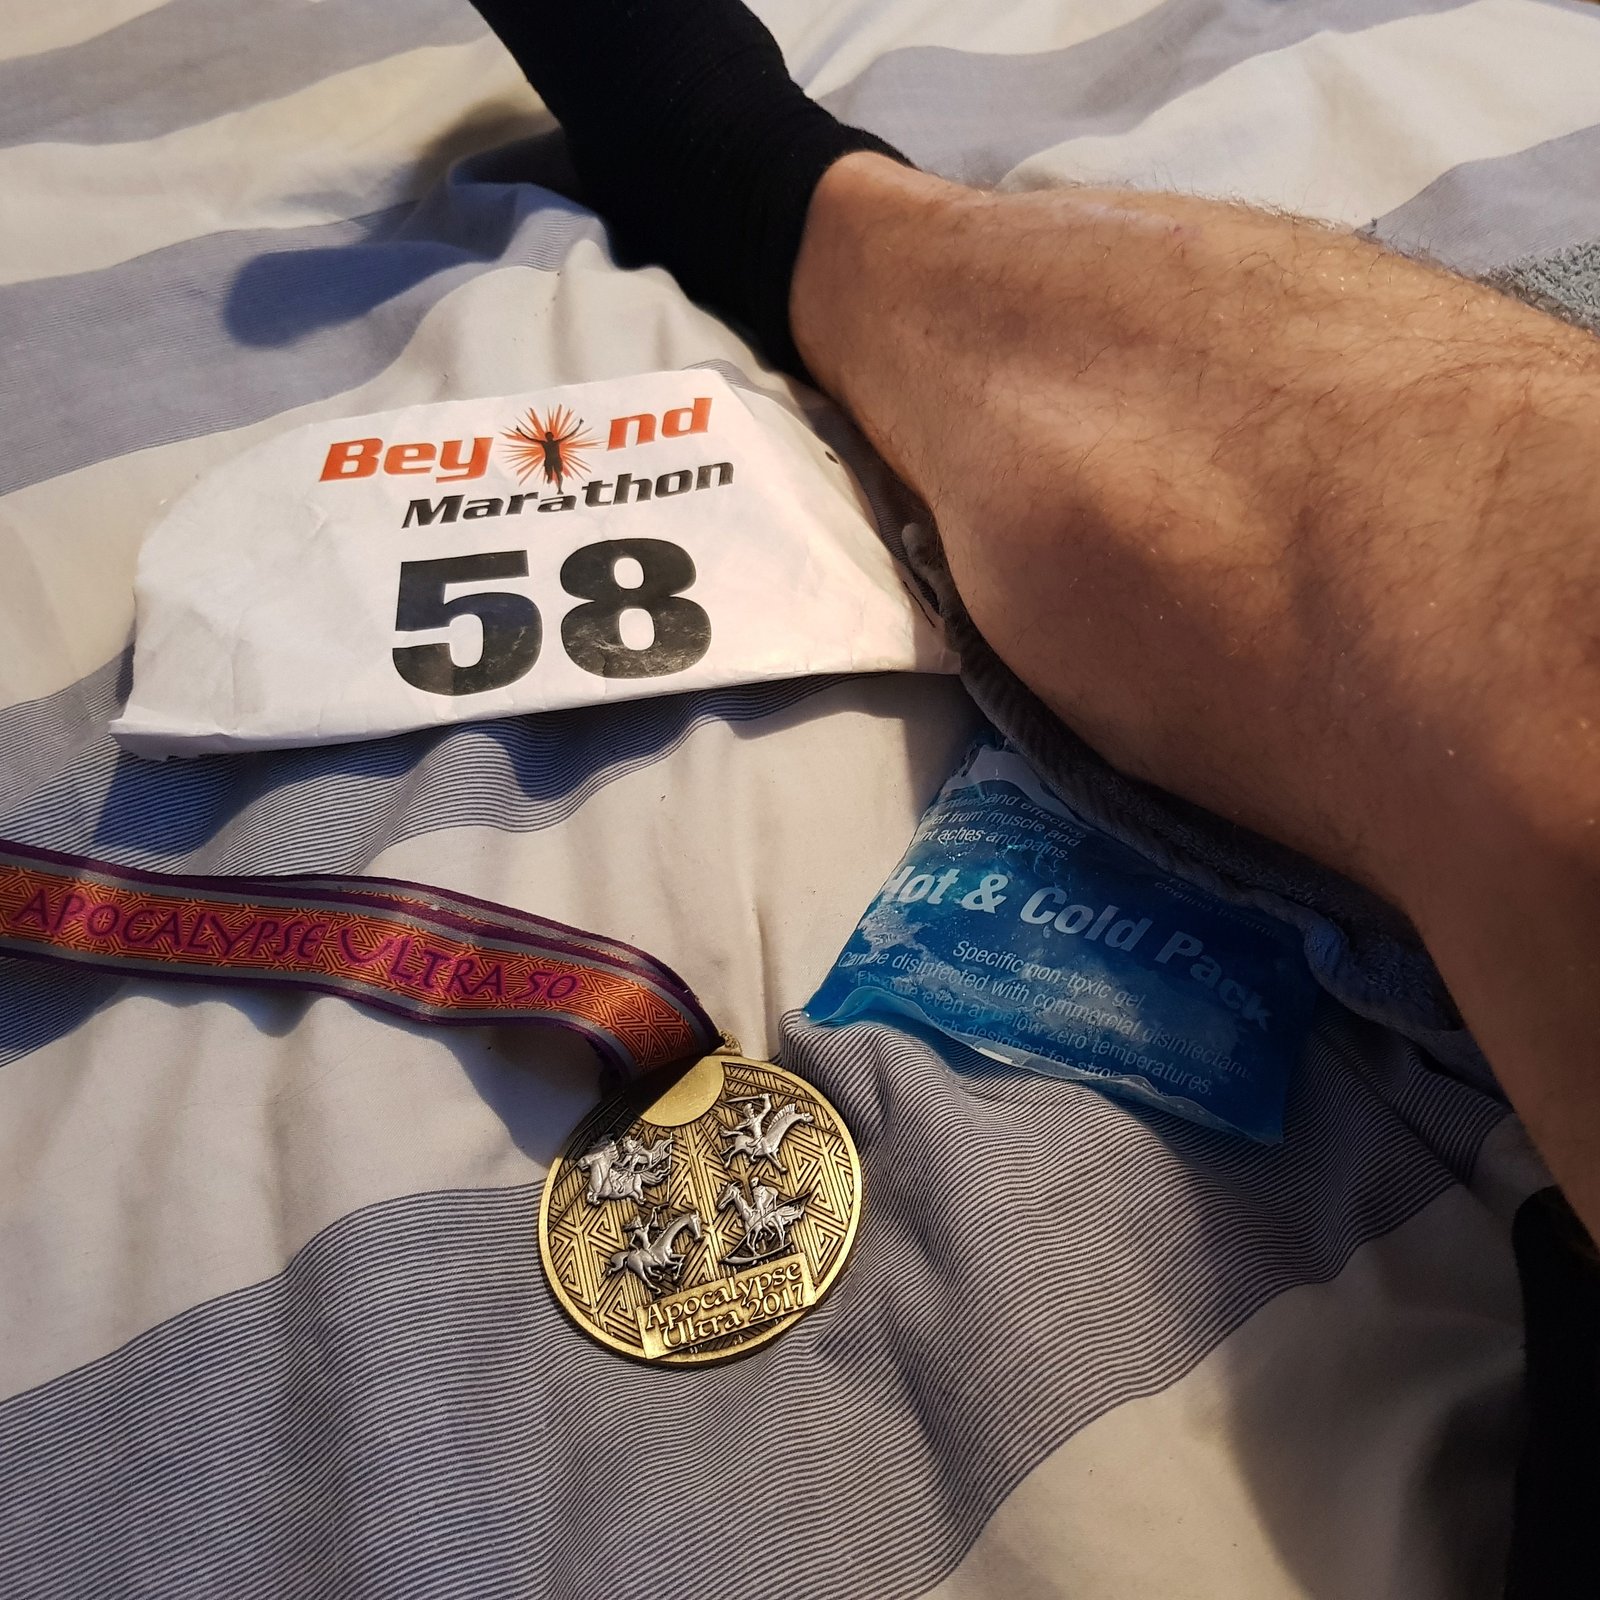 Swollen Calf and Finishers Medal